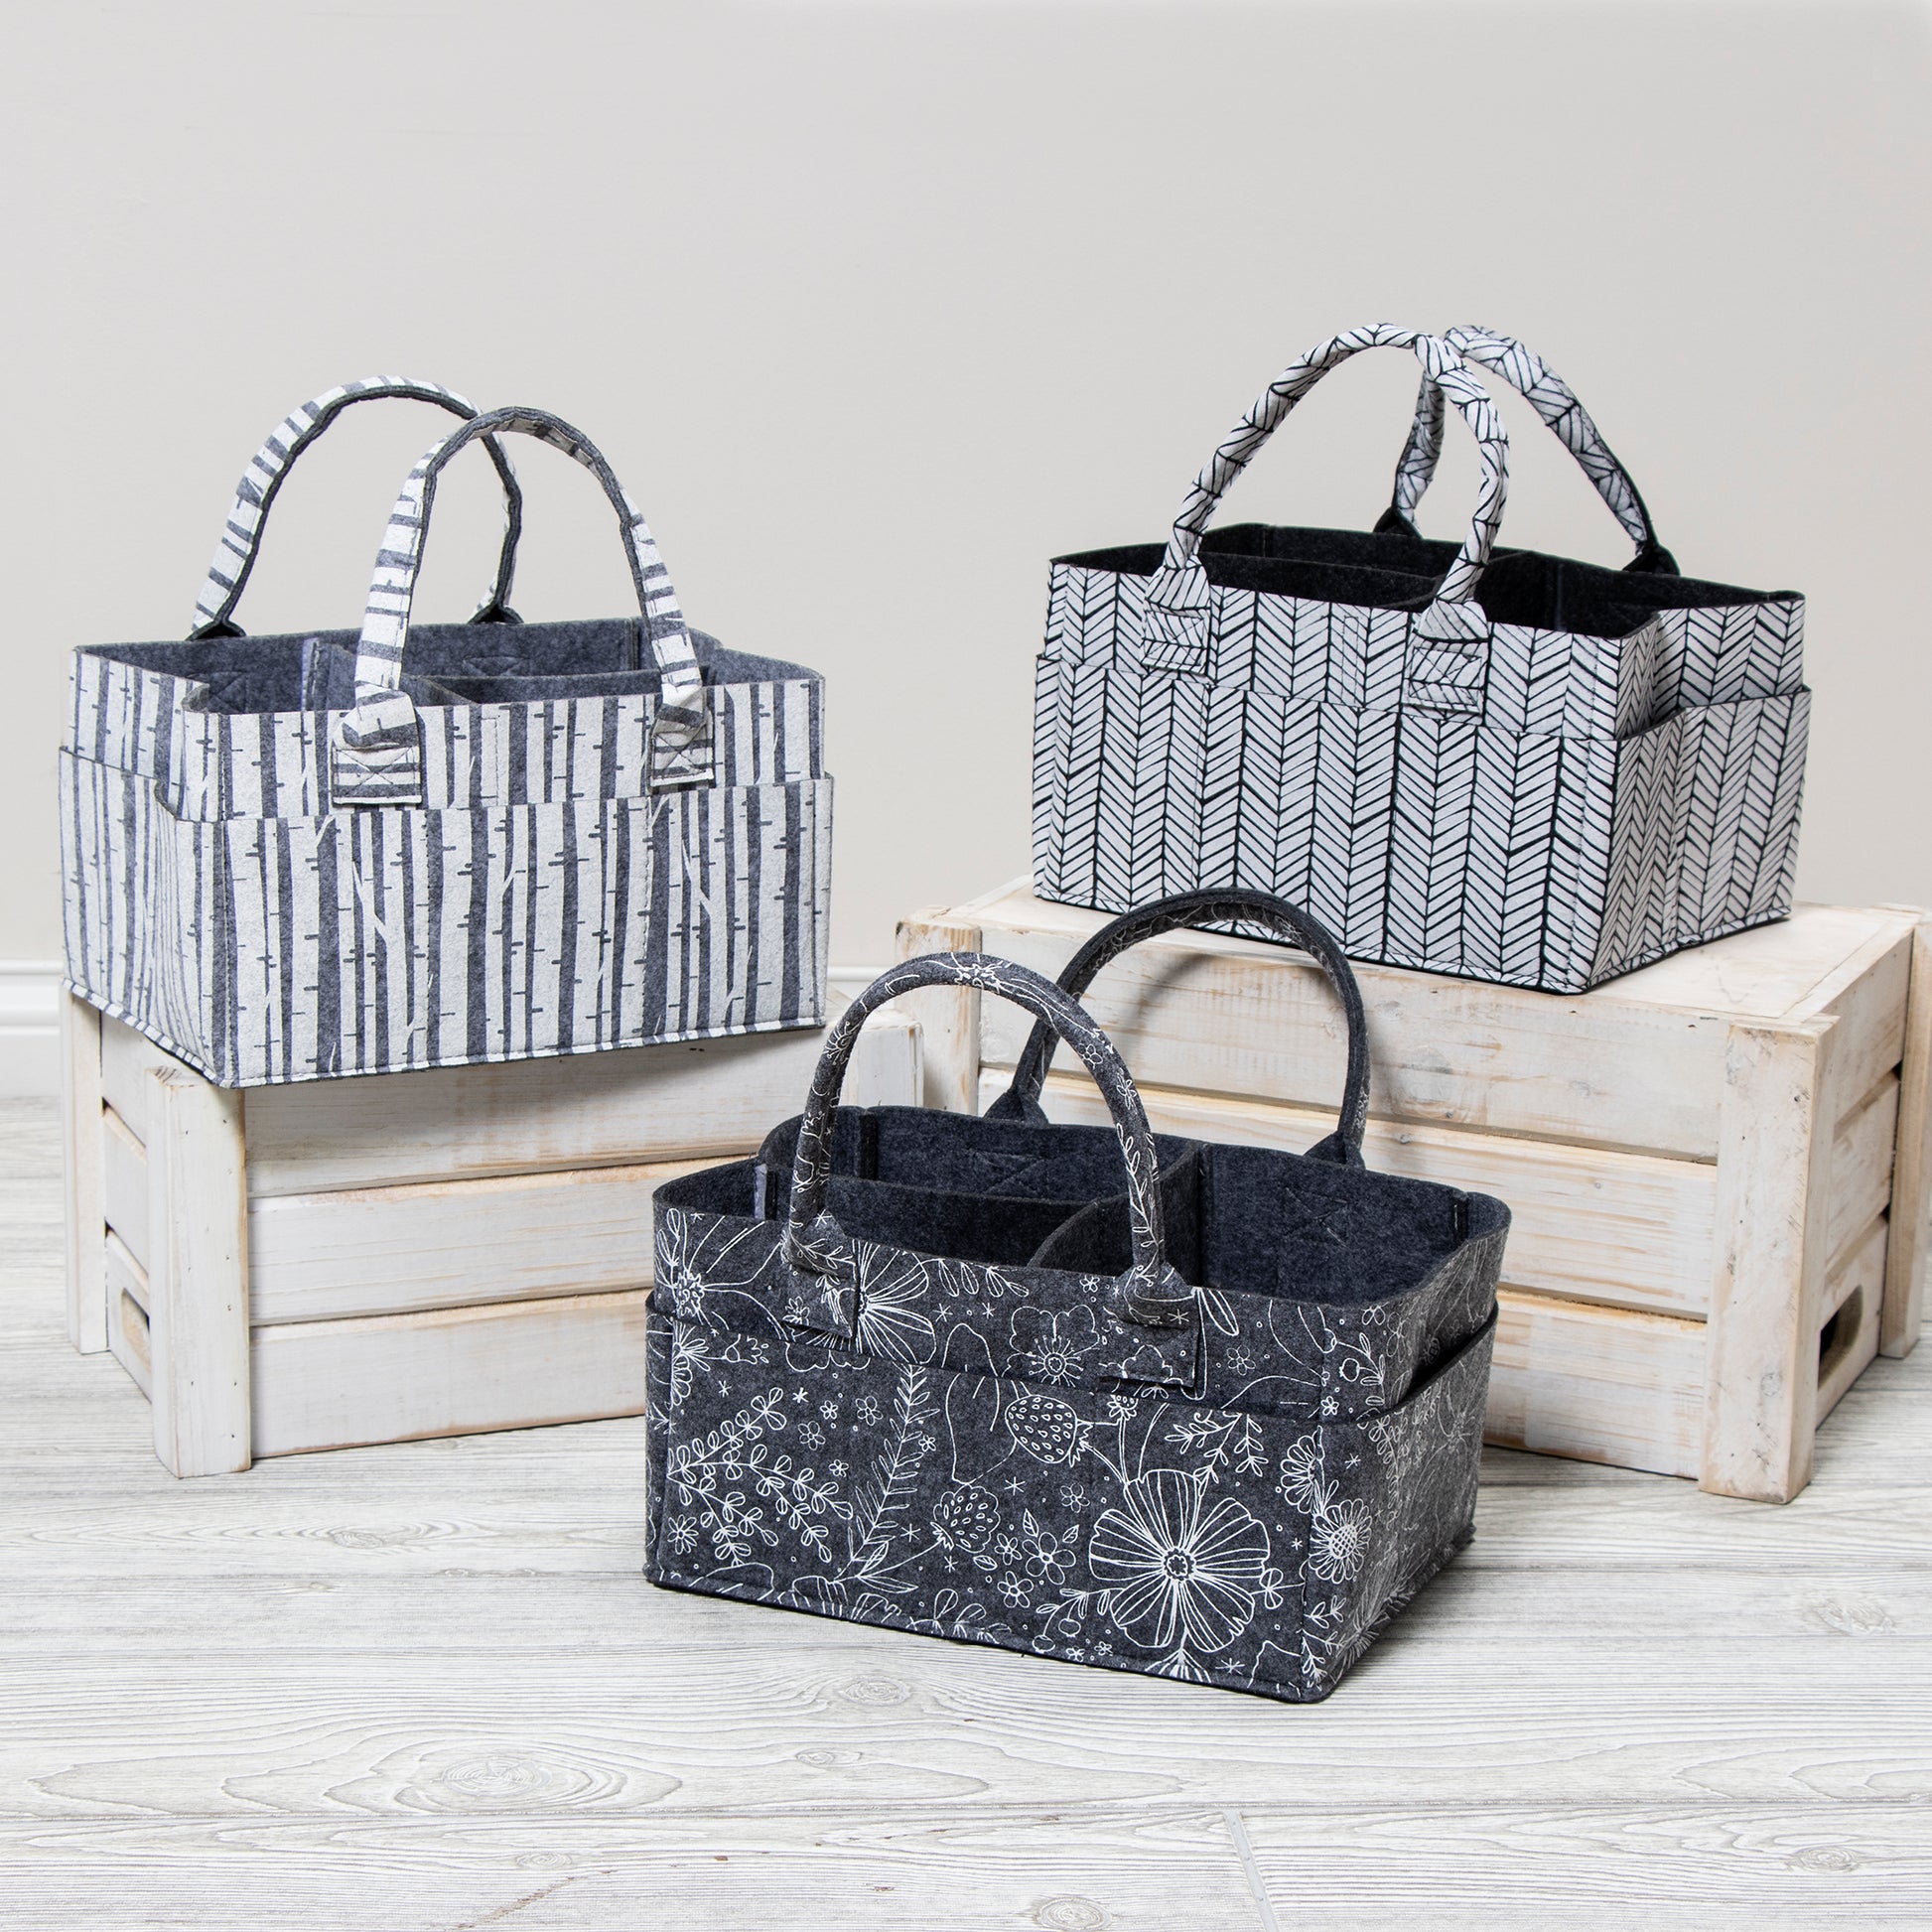 Floral Felt Storage Caddy by Sammy & Lou® features 2 other caddies from felt collection